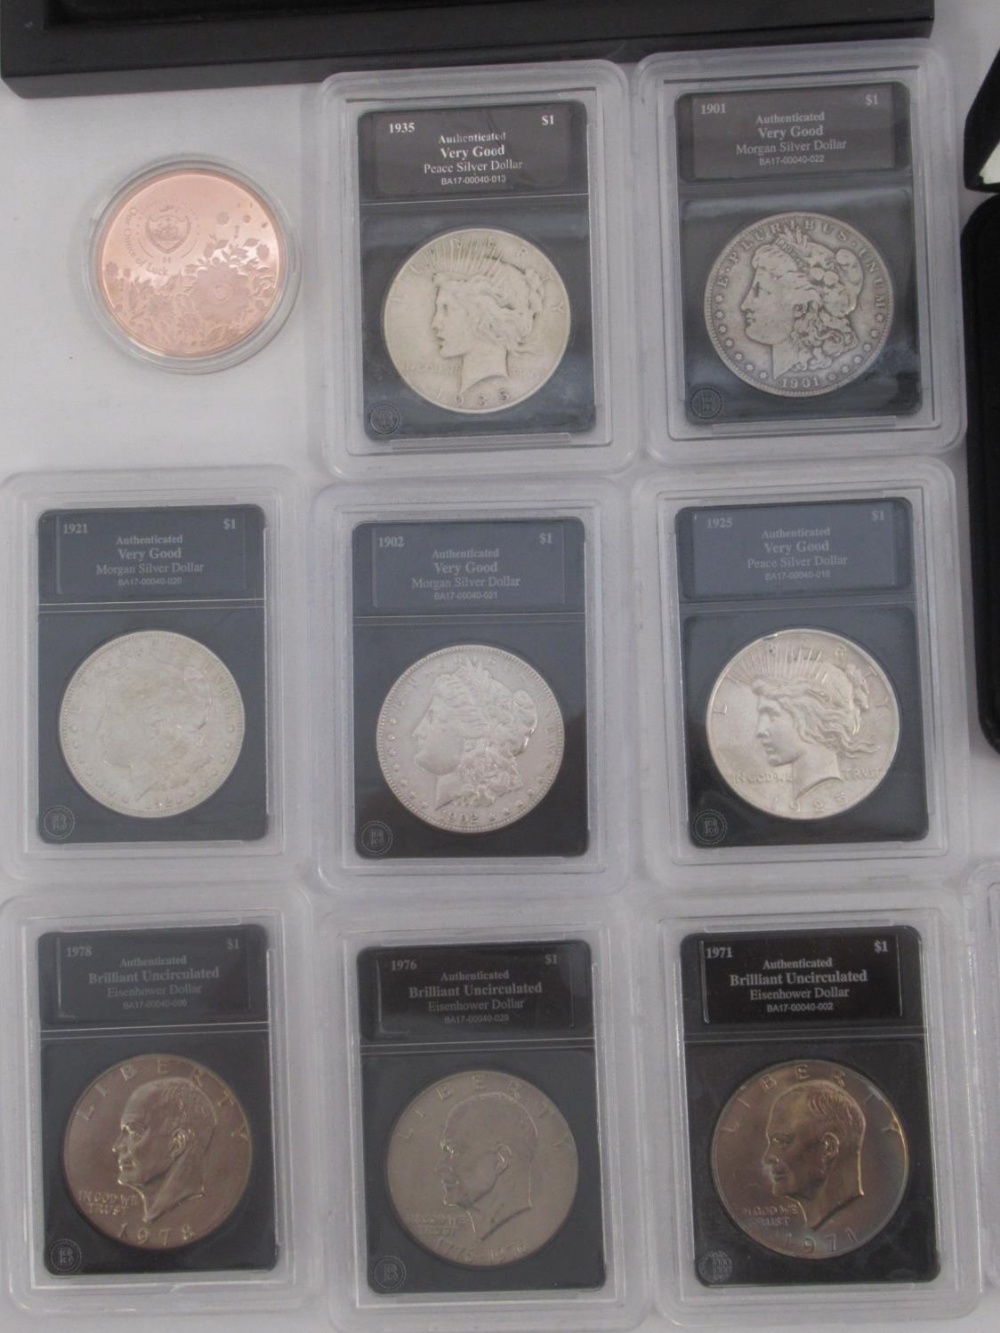 11 American silver dollars encapsulated, 8 Uncirculated Dollars encapsulated, Republic of Palau - Image 4 of 5